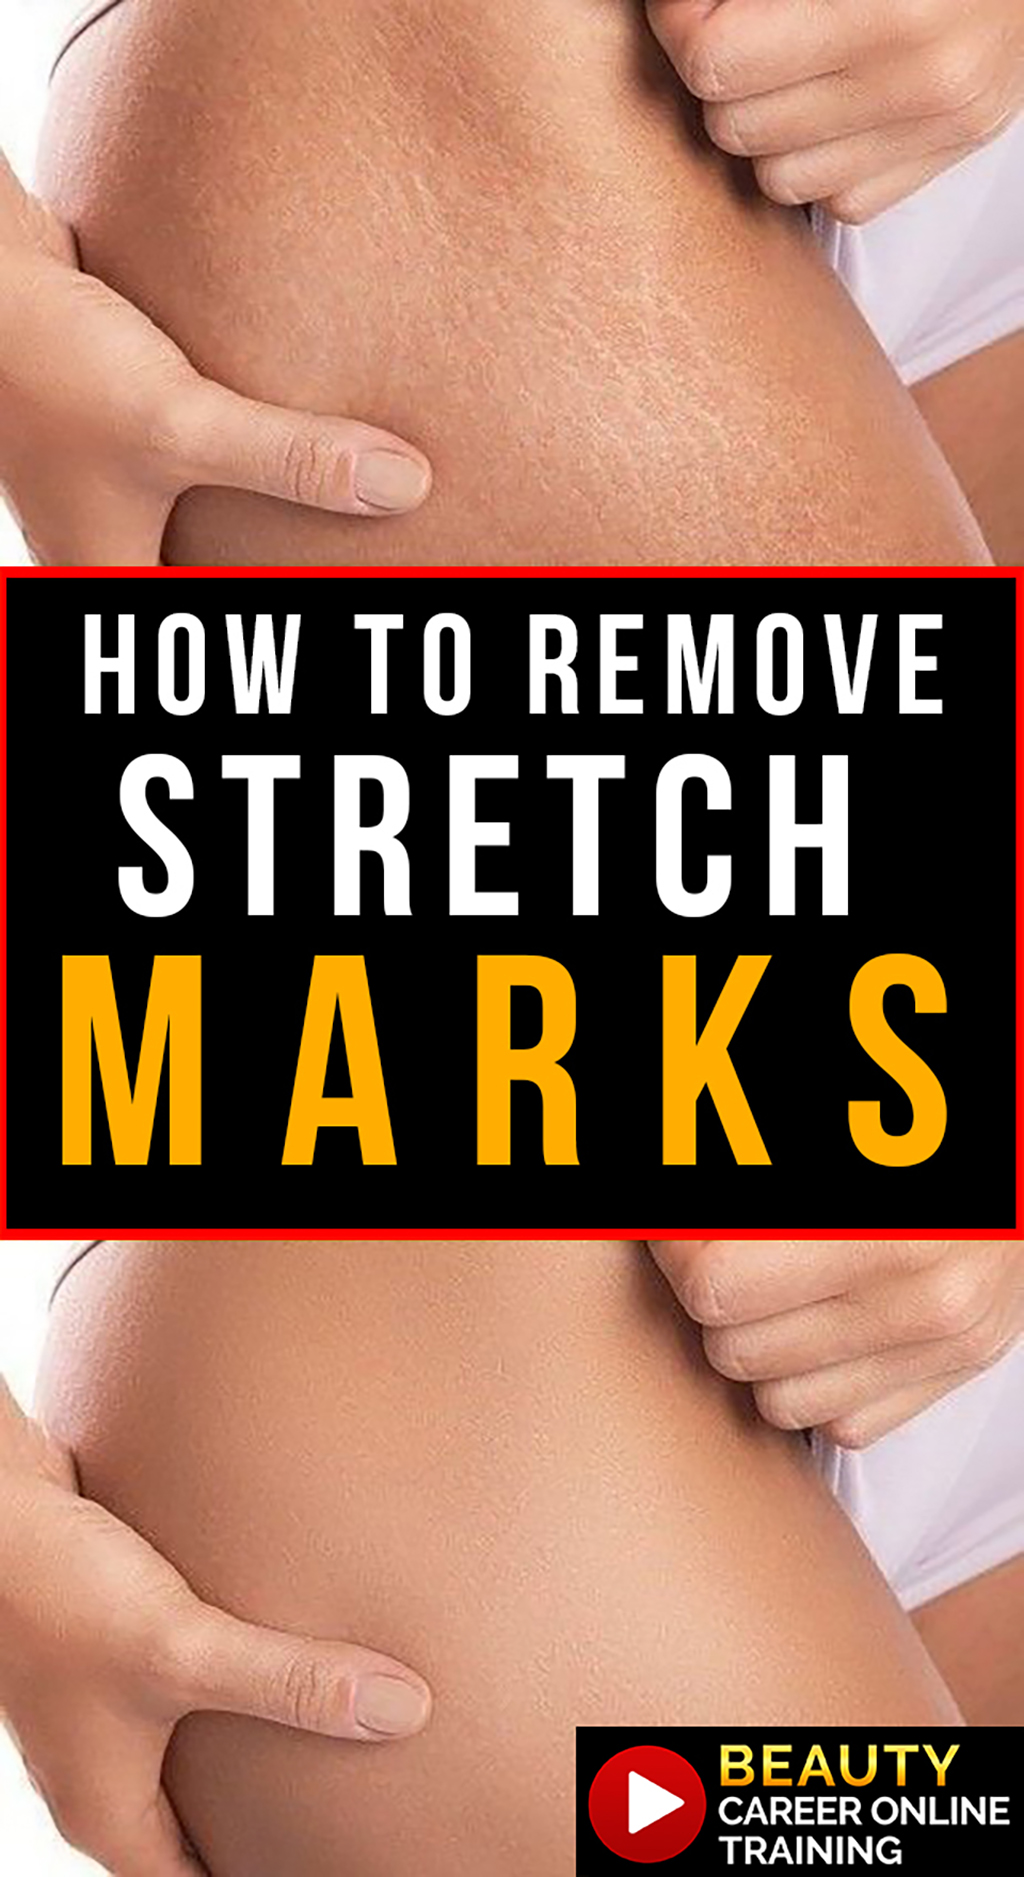 How to remove stretch marks, Diminish stretch marks, pregnancy stretch marks, weight loss stretch marks, weight gain stretch marks